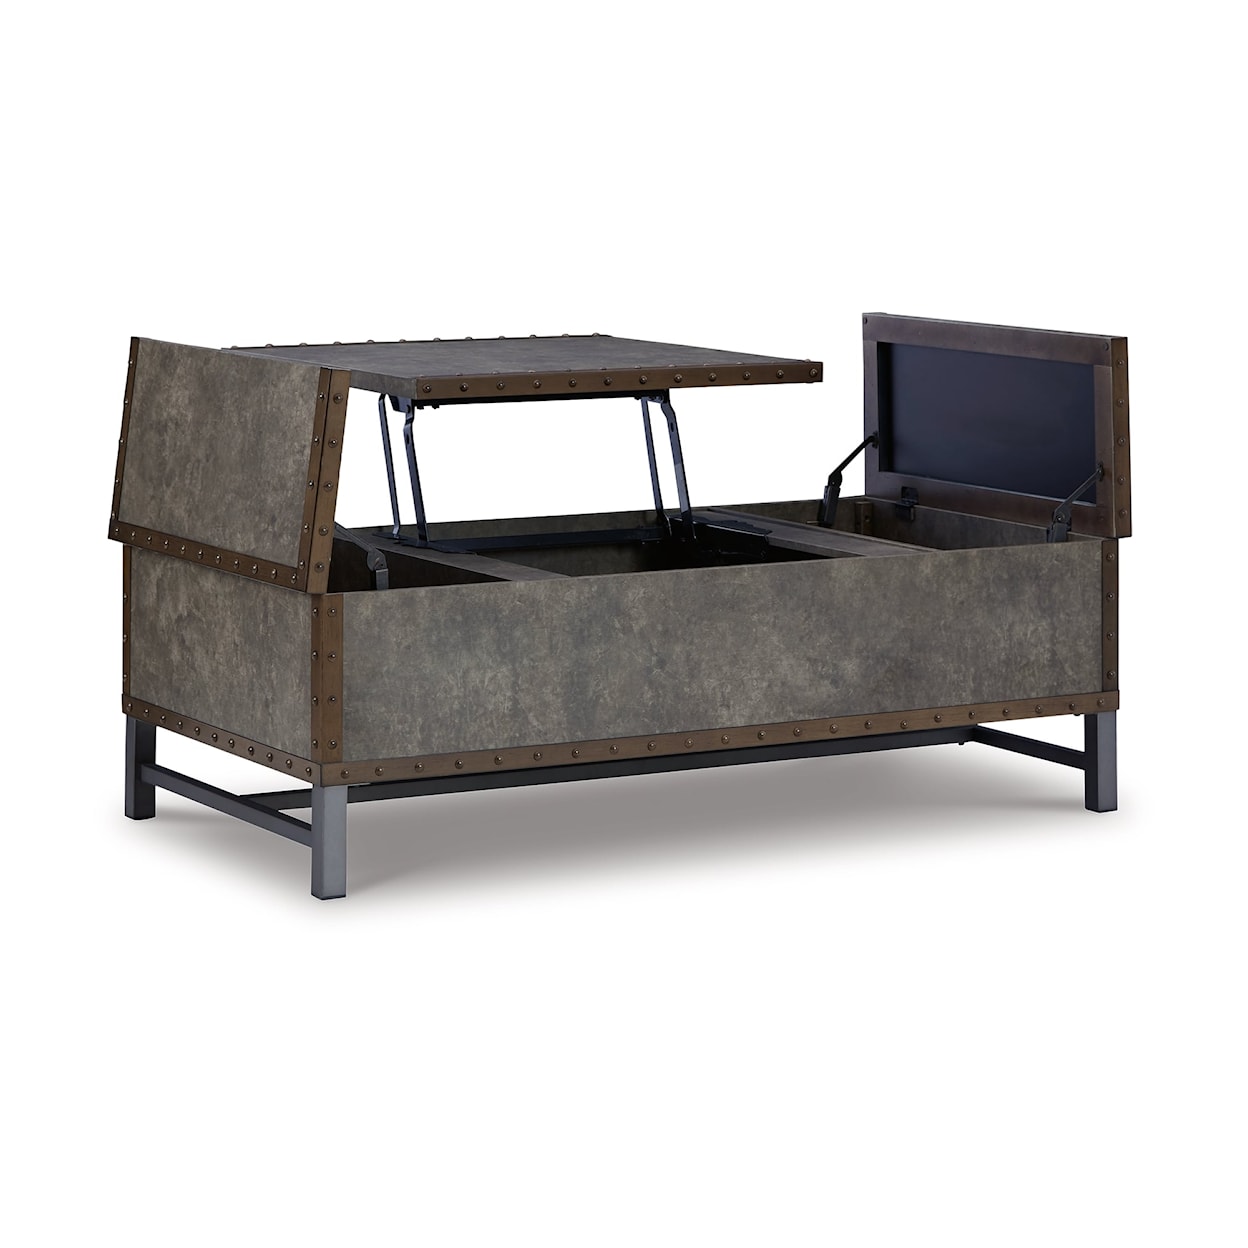 Signature Design by Ashley Furniture Derrylin Lift-Top Coffee Table